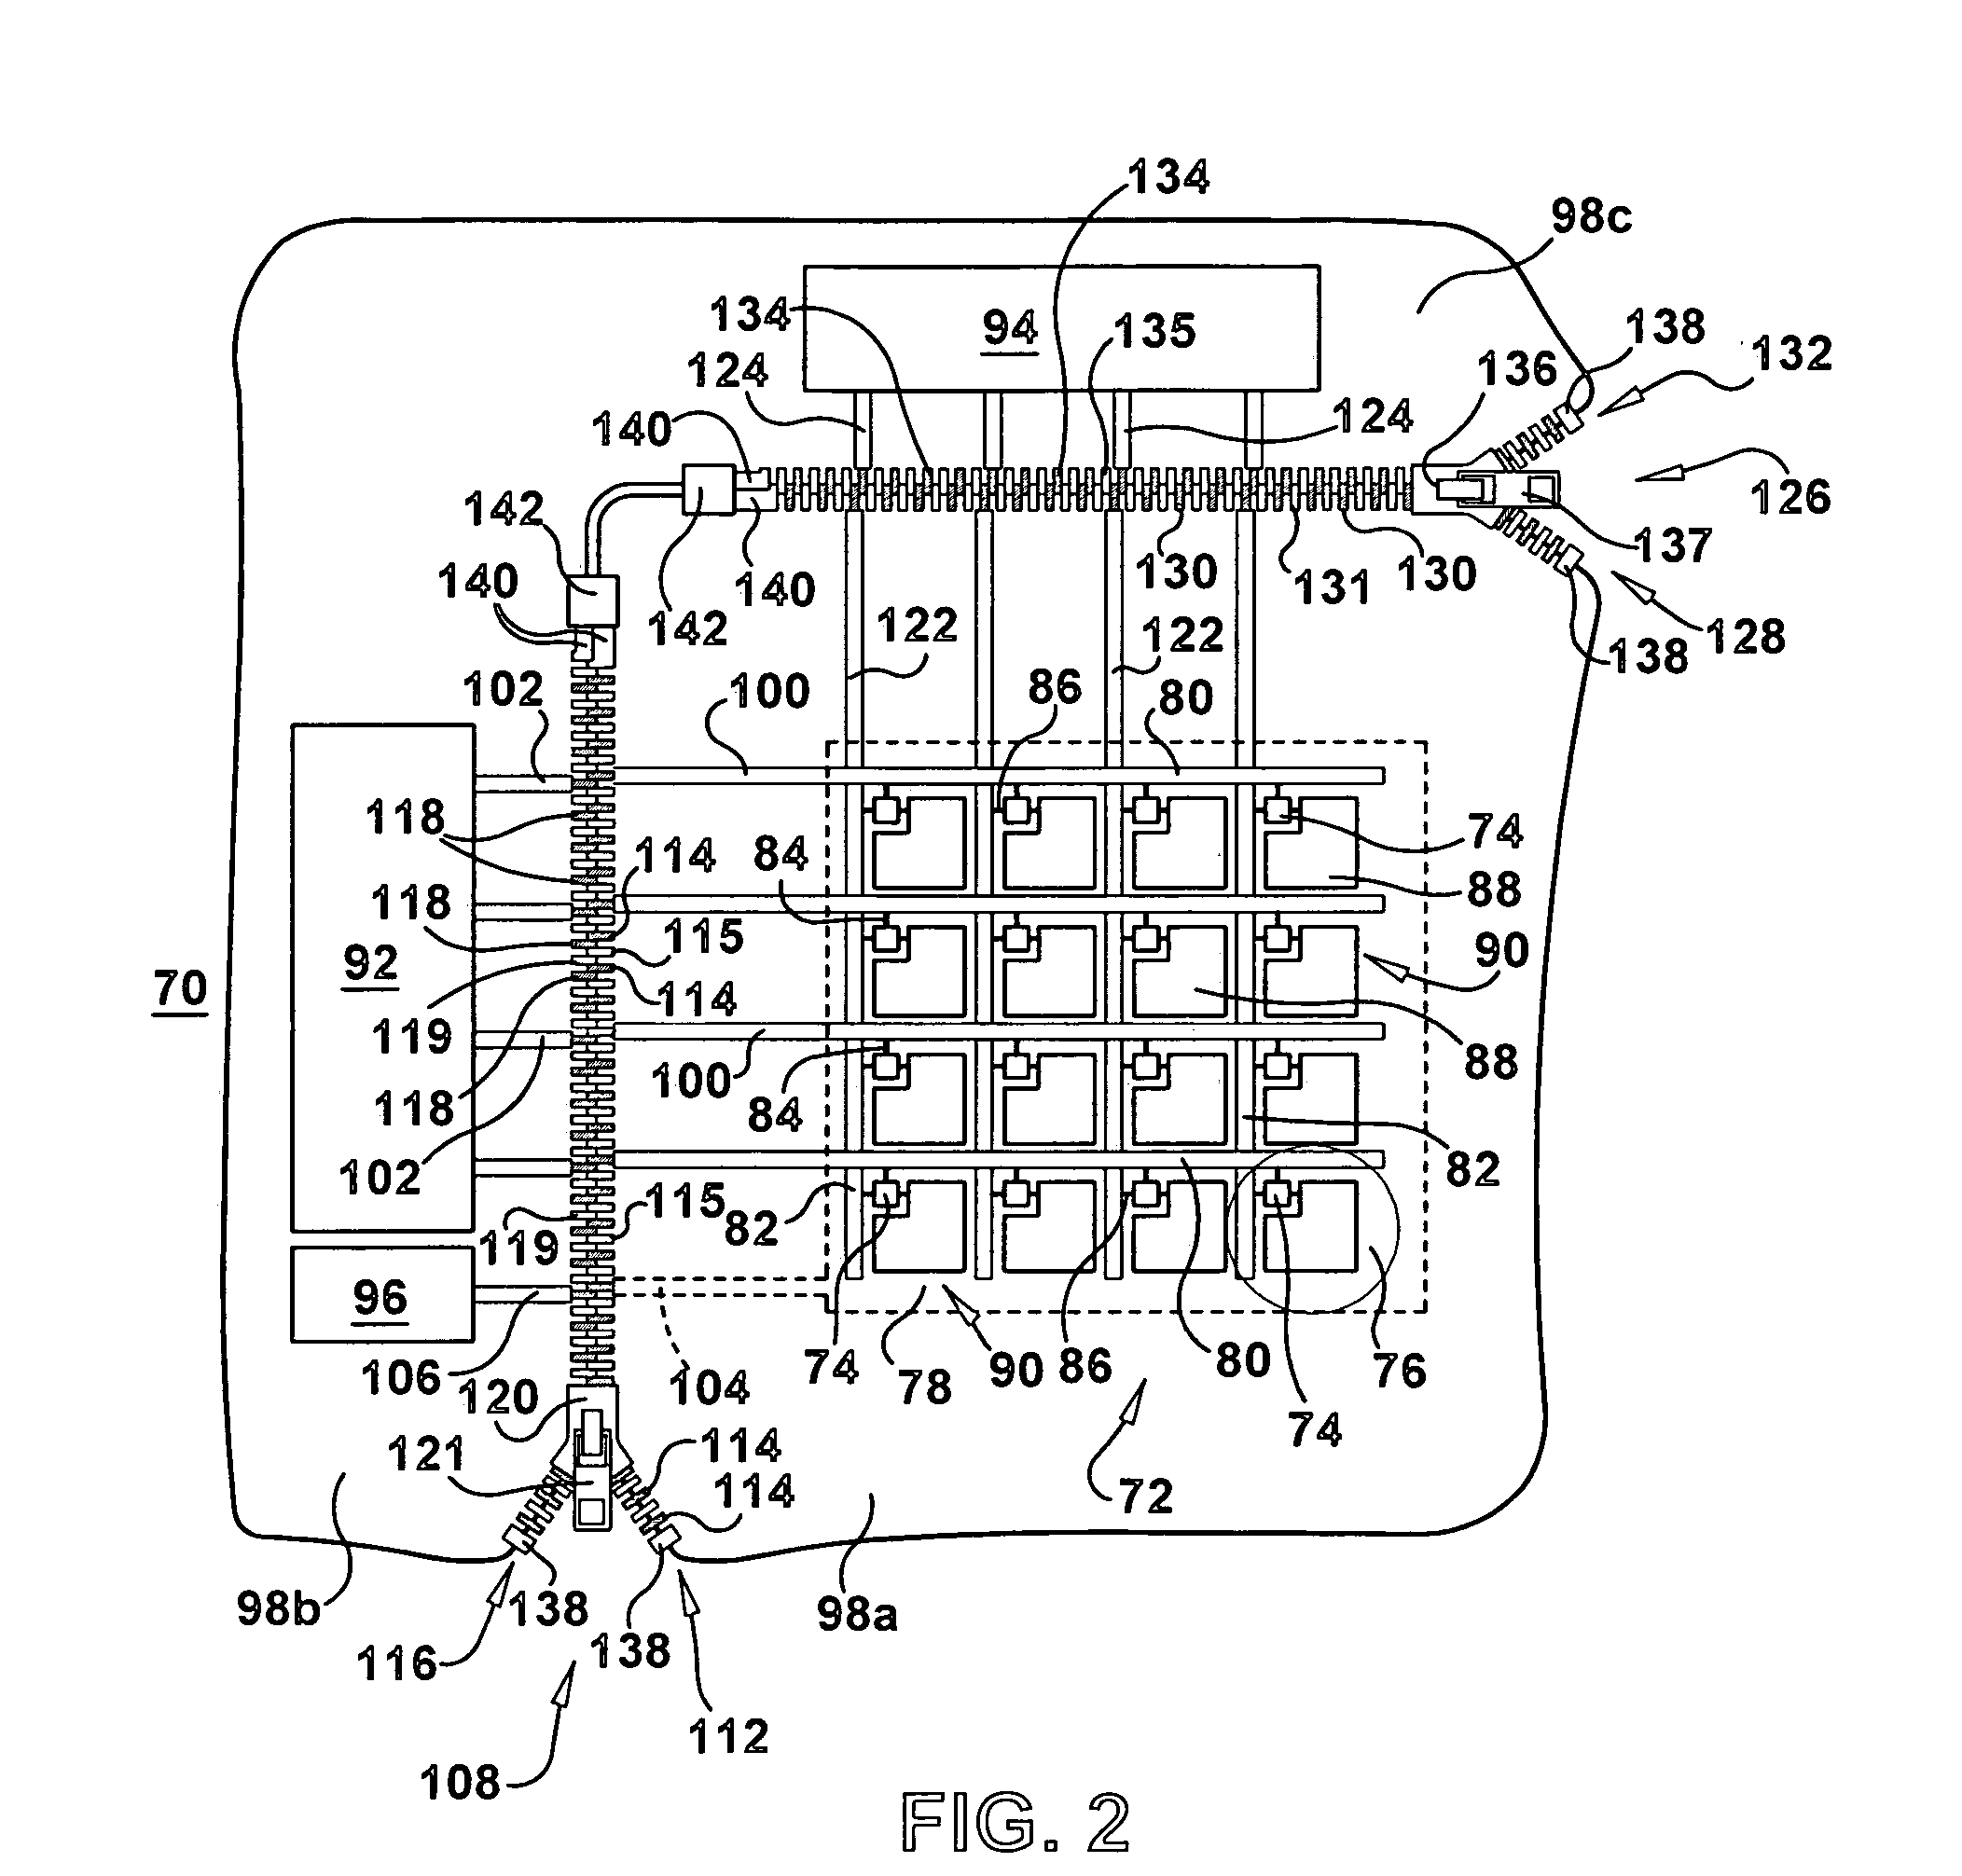 Display device with electrical zipper interconnect